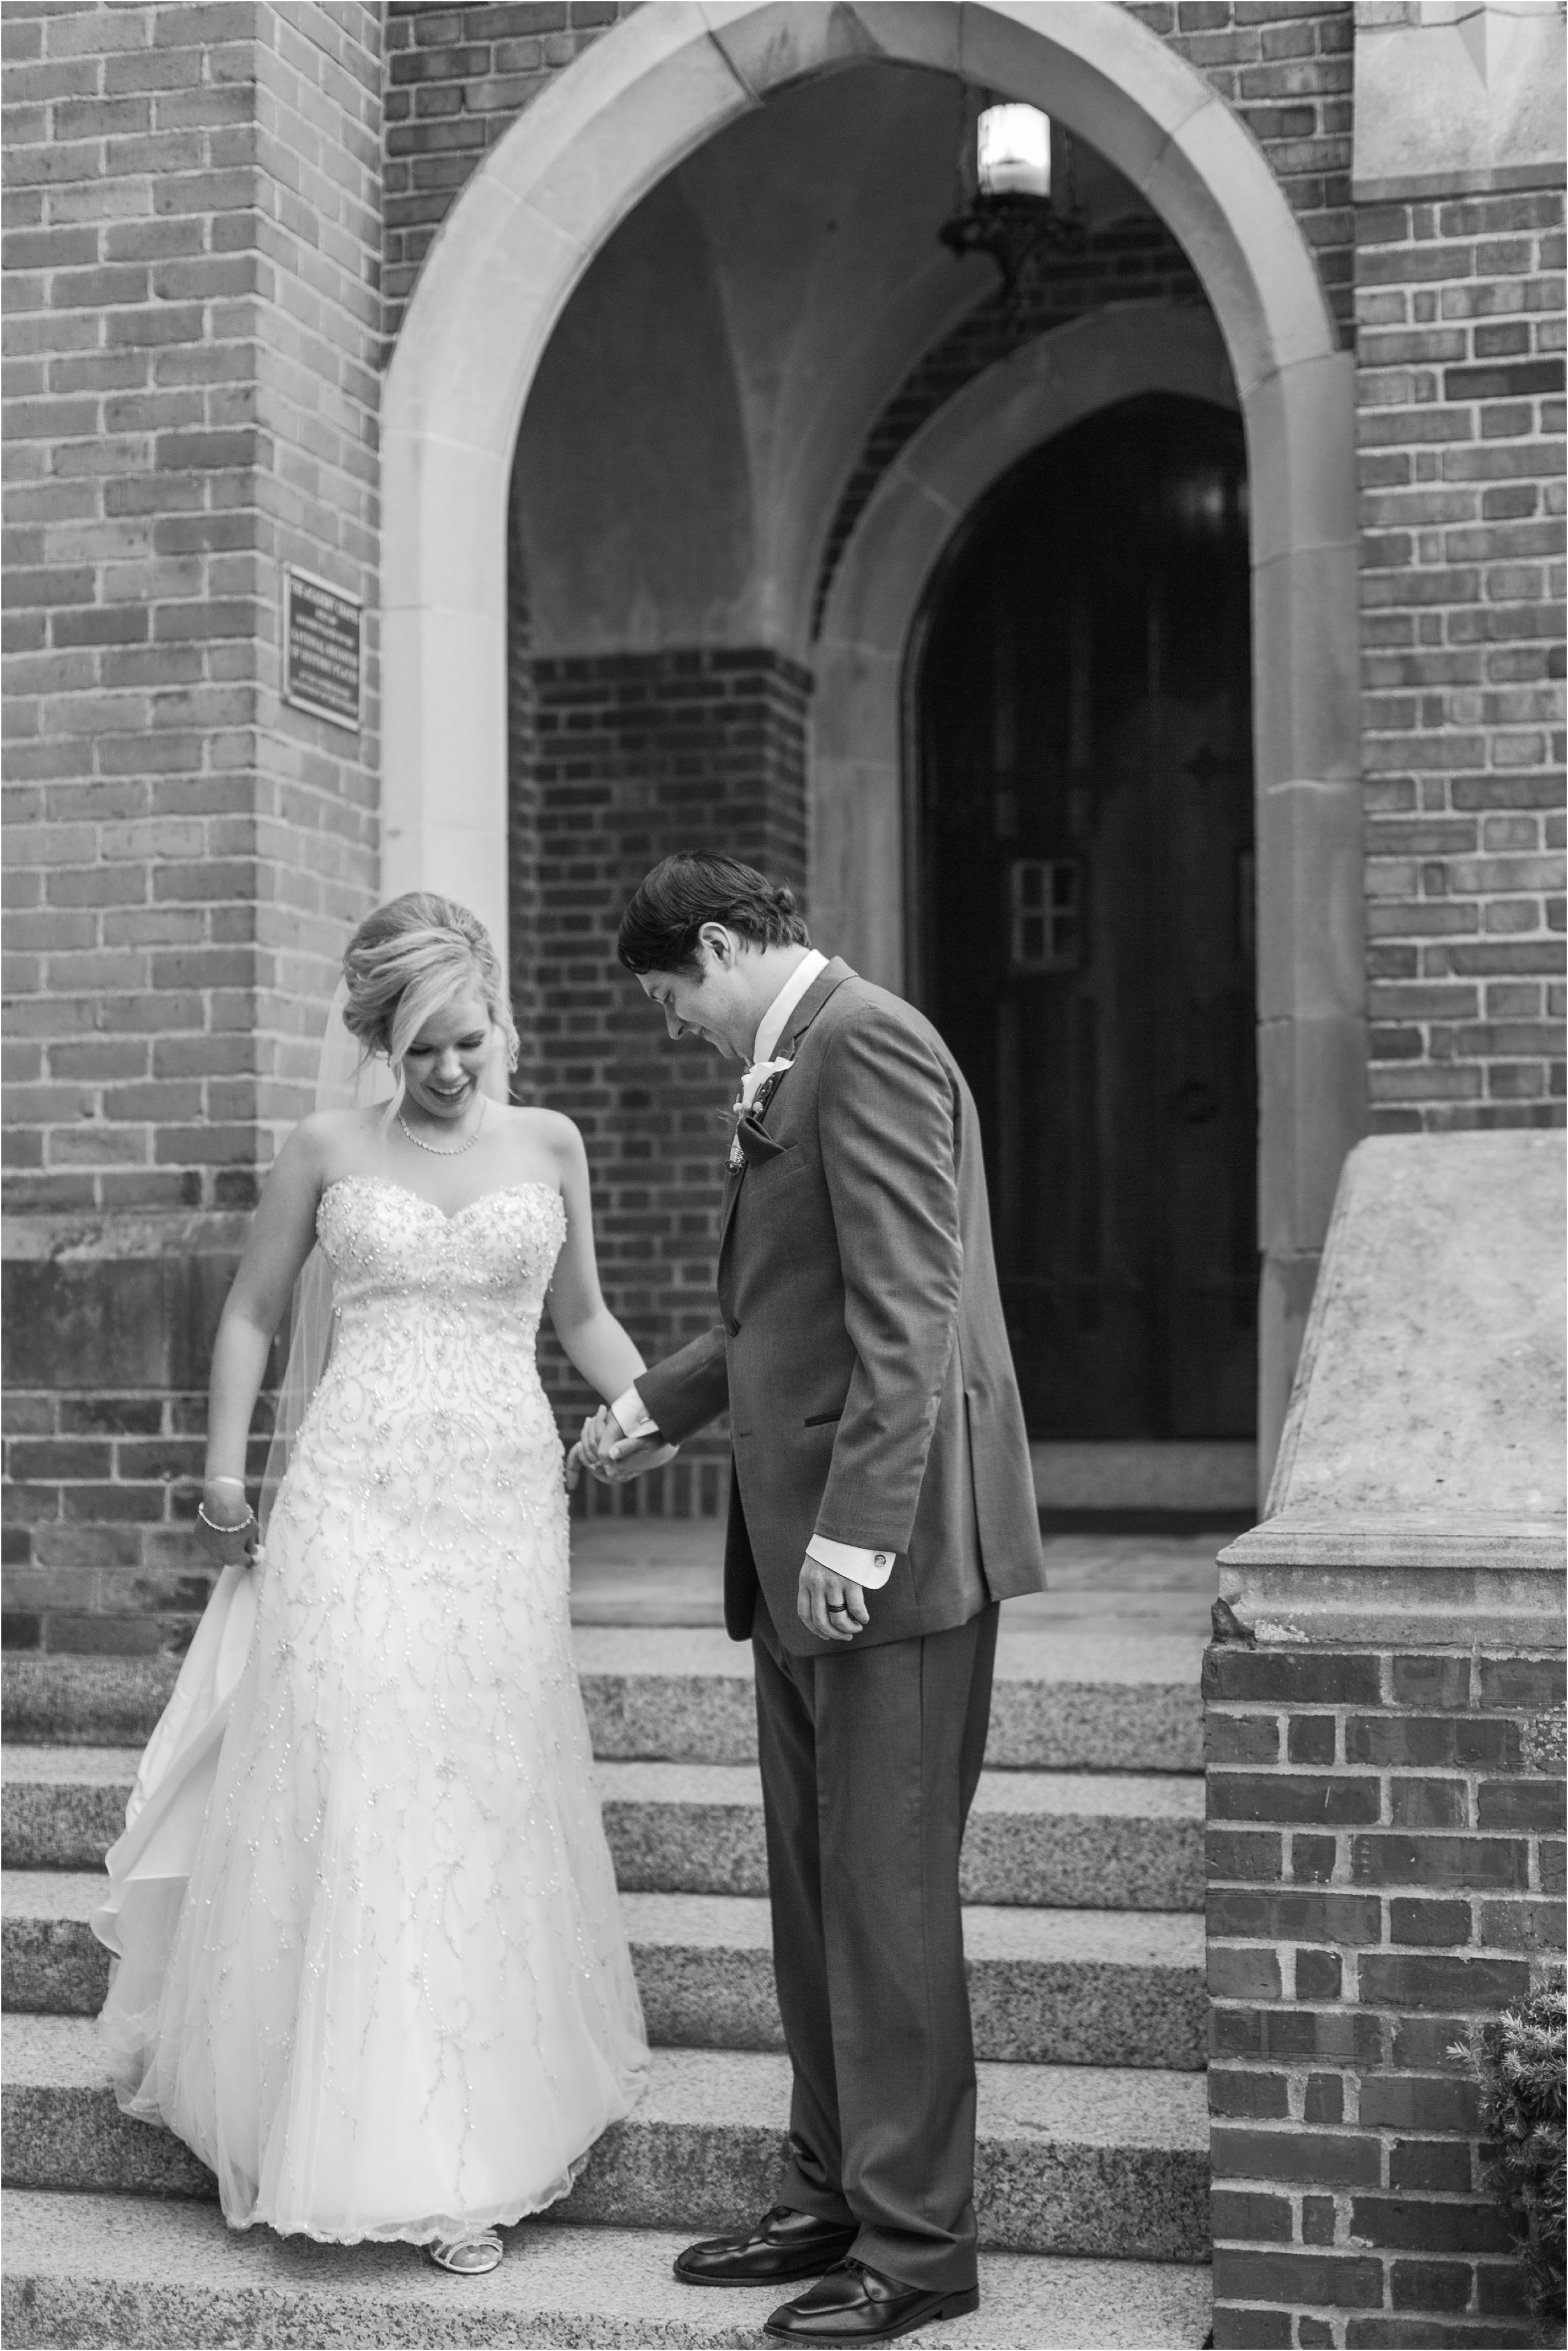 romantic-timeless-candid-wedding-photos-at-grosse-pointe-academy-in-grosse-pointe-mi-by-courtney-carolyn-photography_0014.jpg